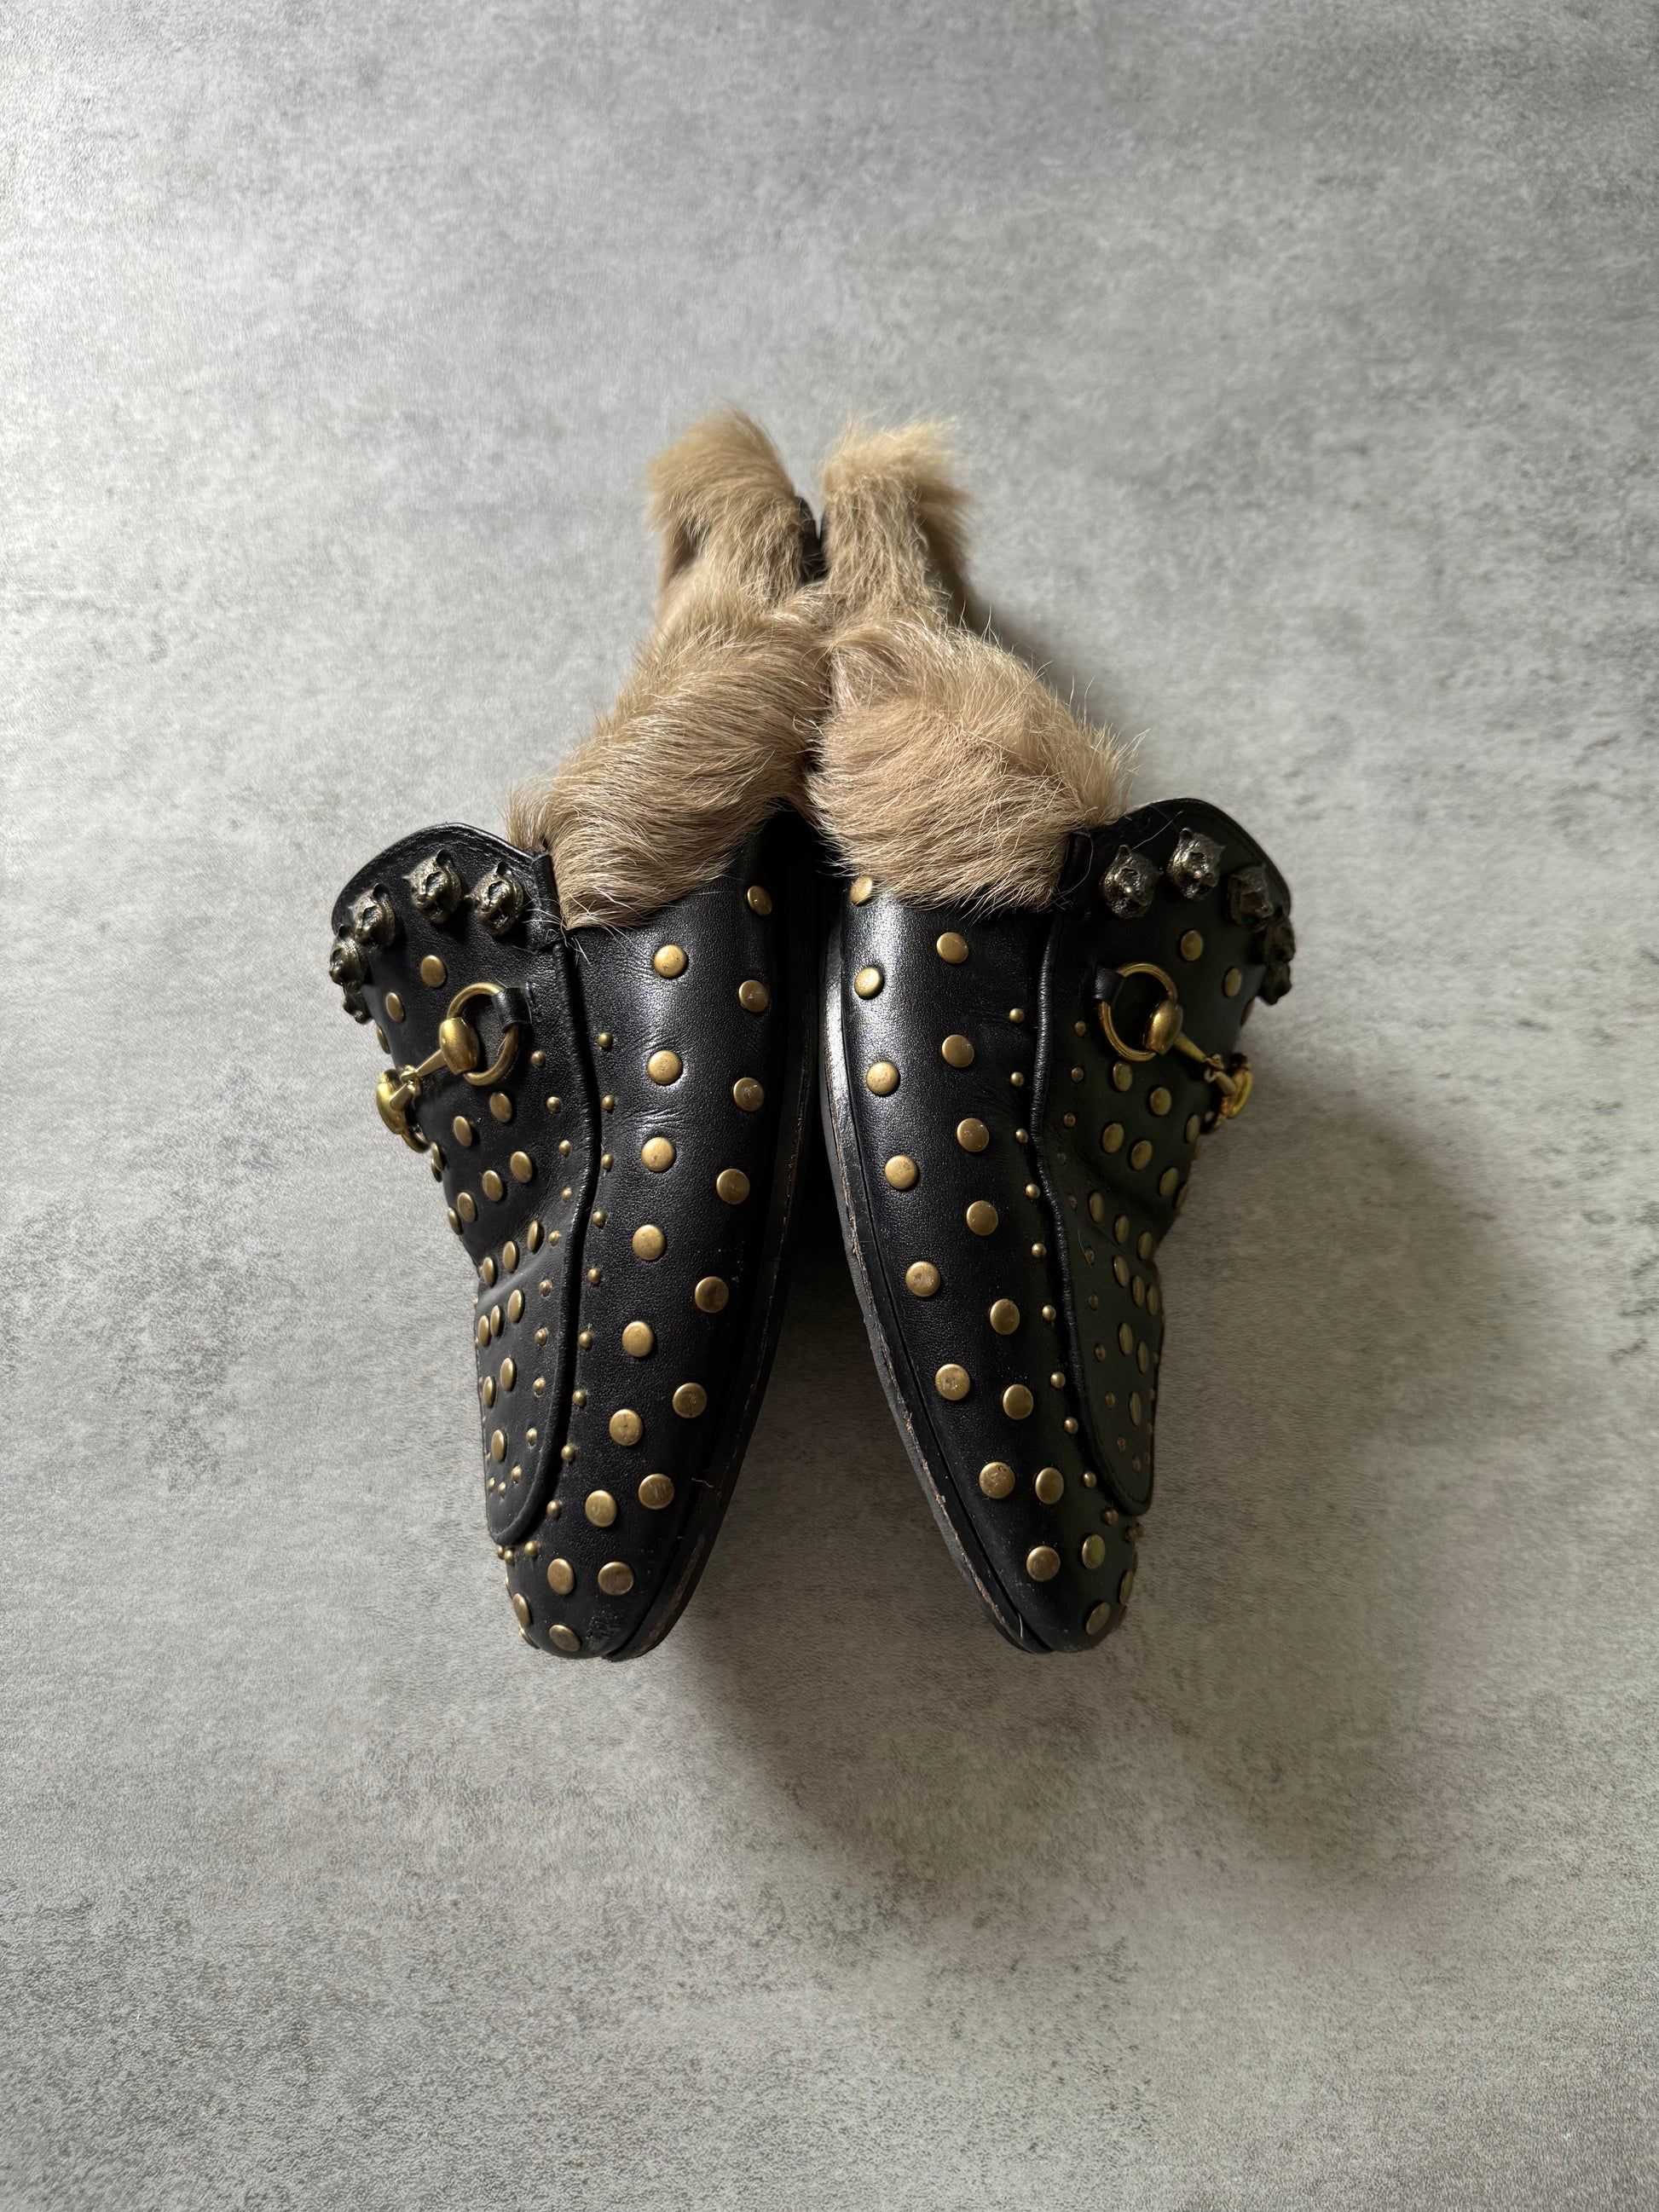 Gucci Princetown Studded Leather Fur Mules (38) - 4